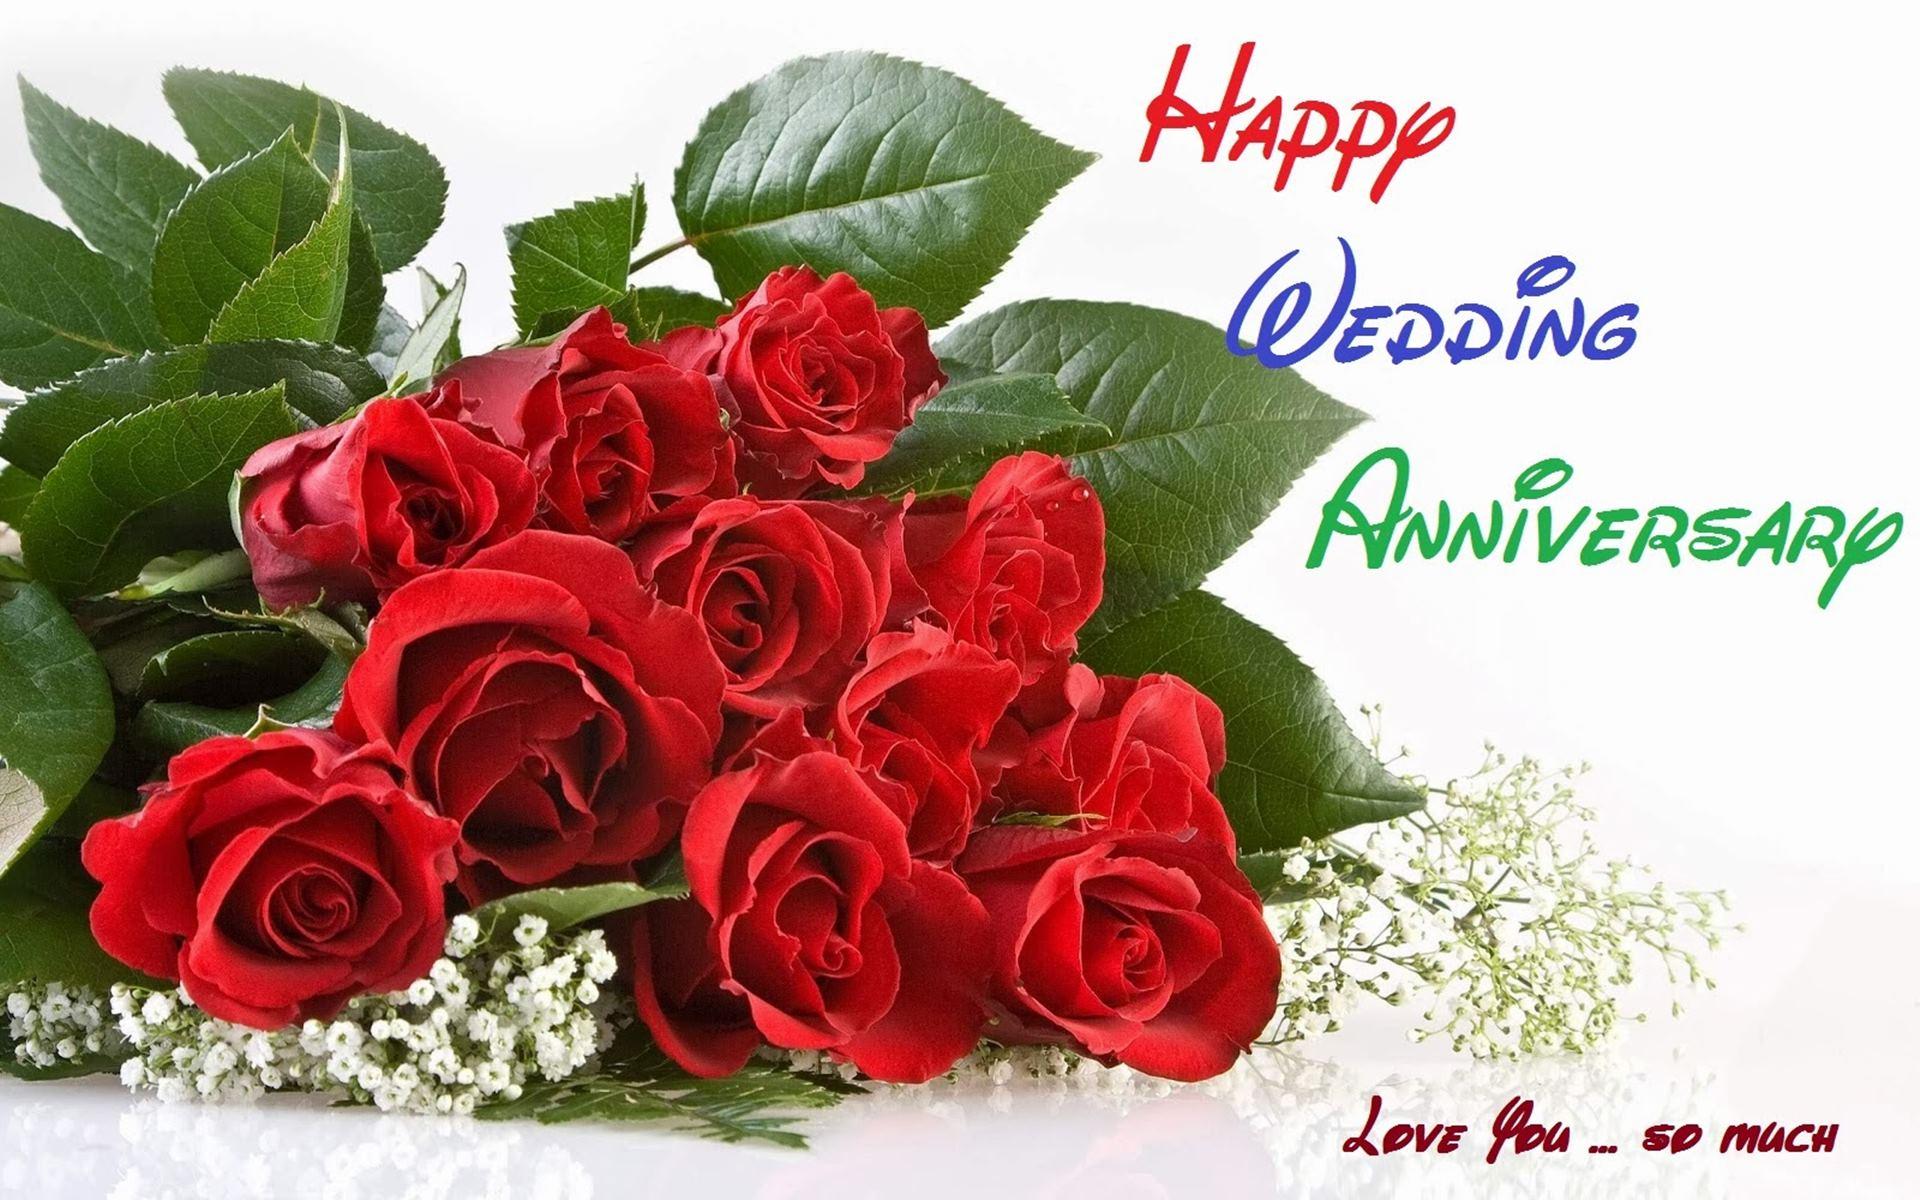 Happy Wedding Anniversary With Beautiful Roses HD Wallpaper